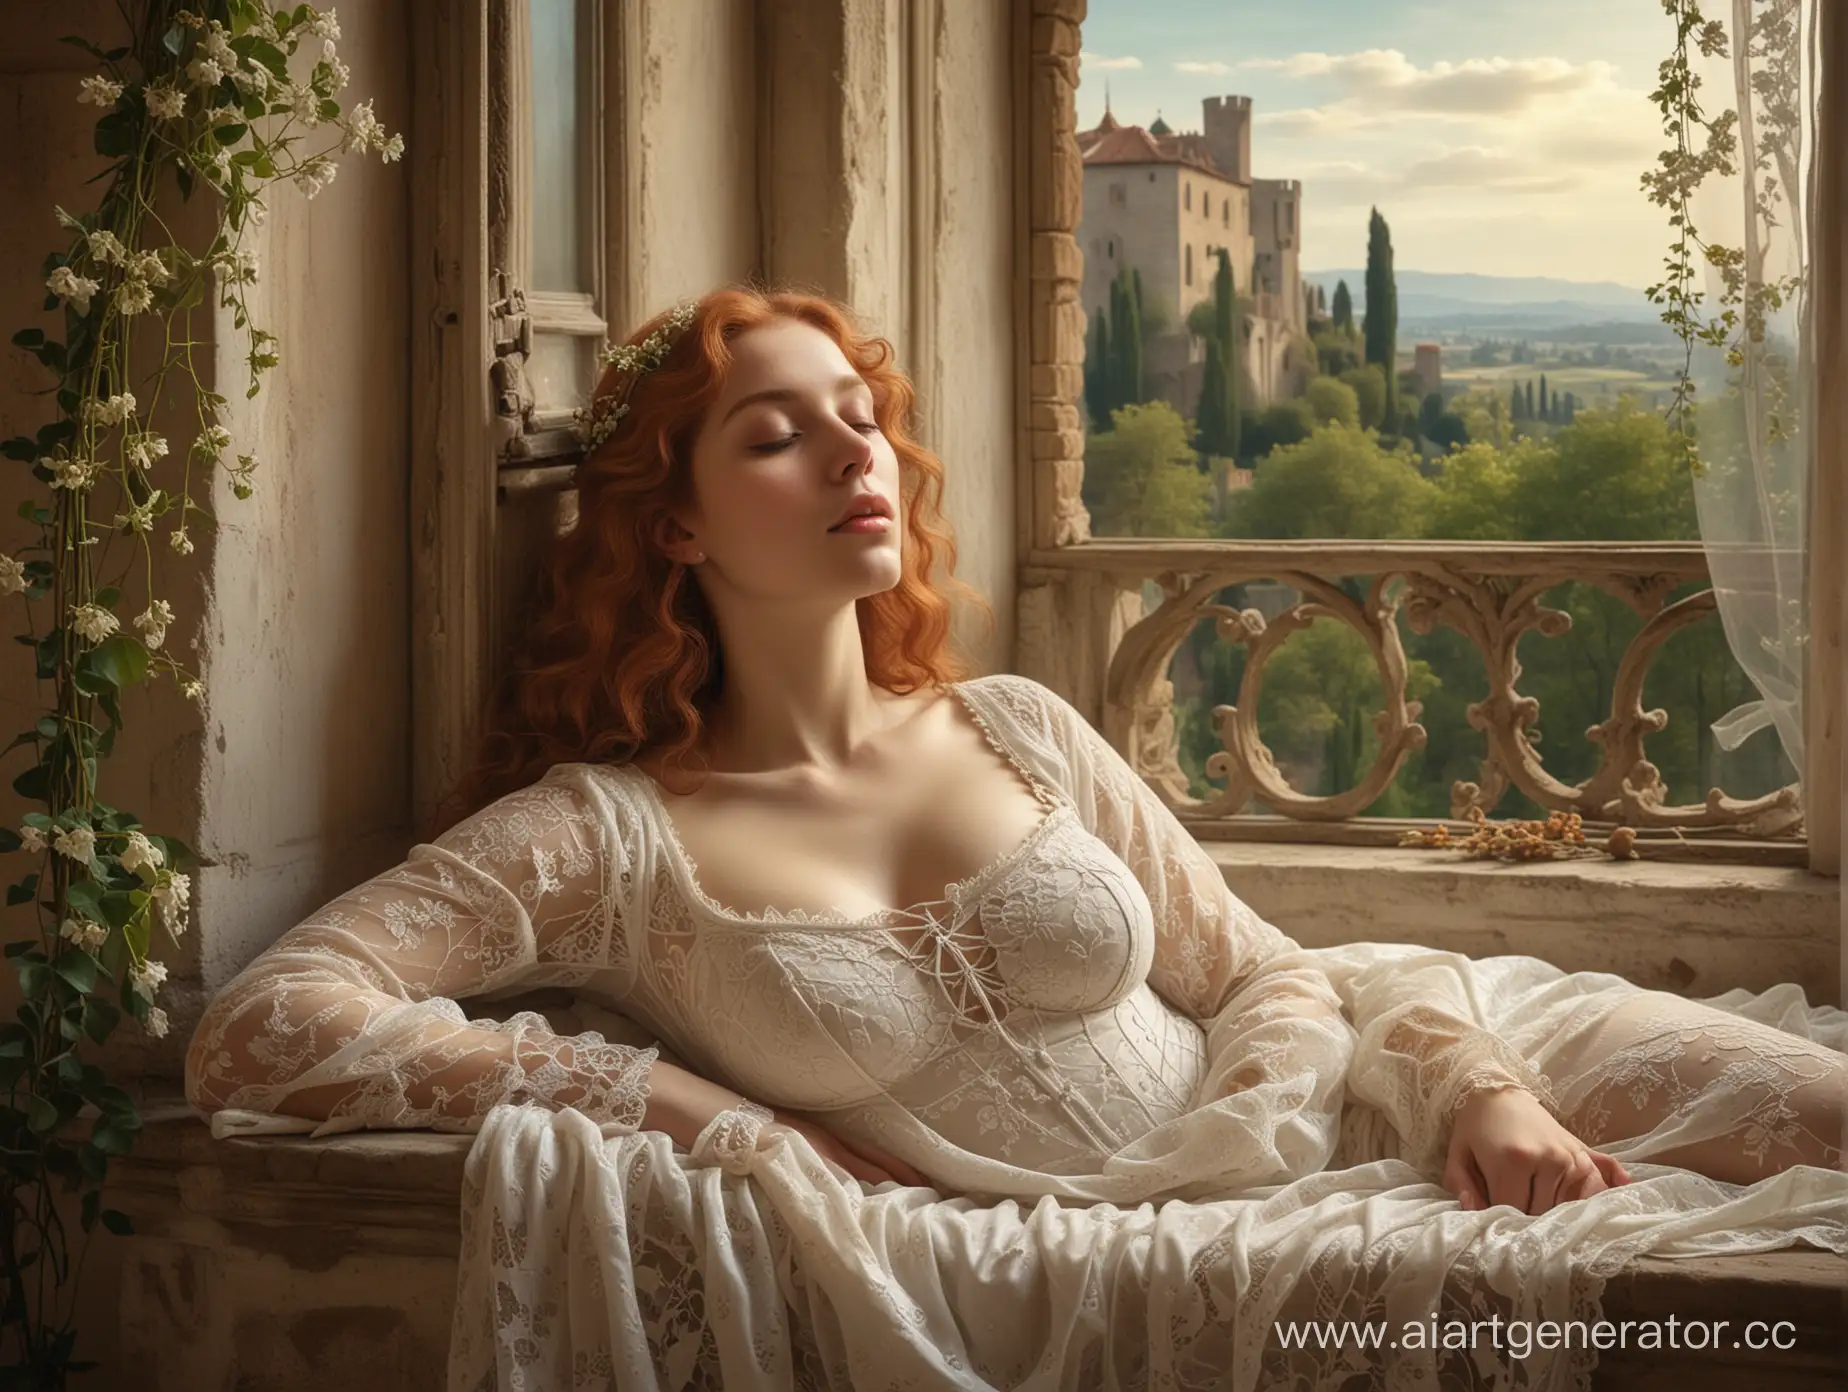 medieval castle in the backbround, lace, light falls from the window, open eyes, spring, big breast, style like sleeping venus Giorgione, stile of penture Boticelli